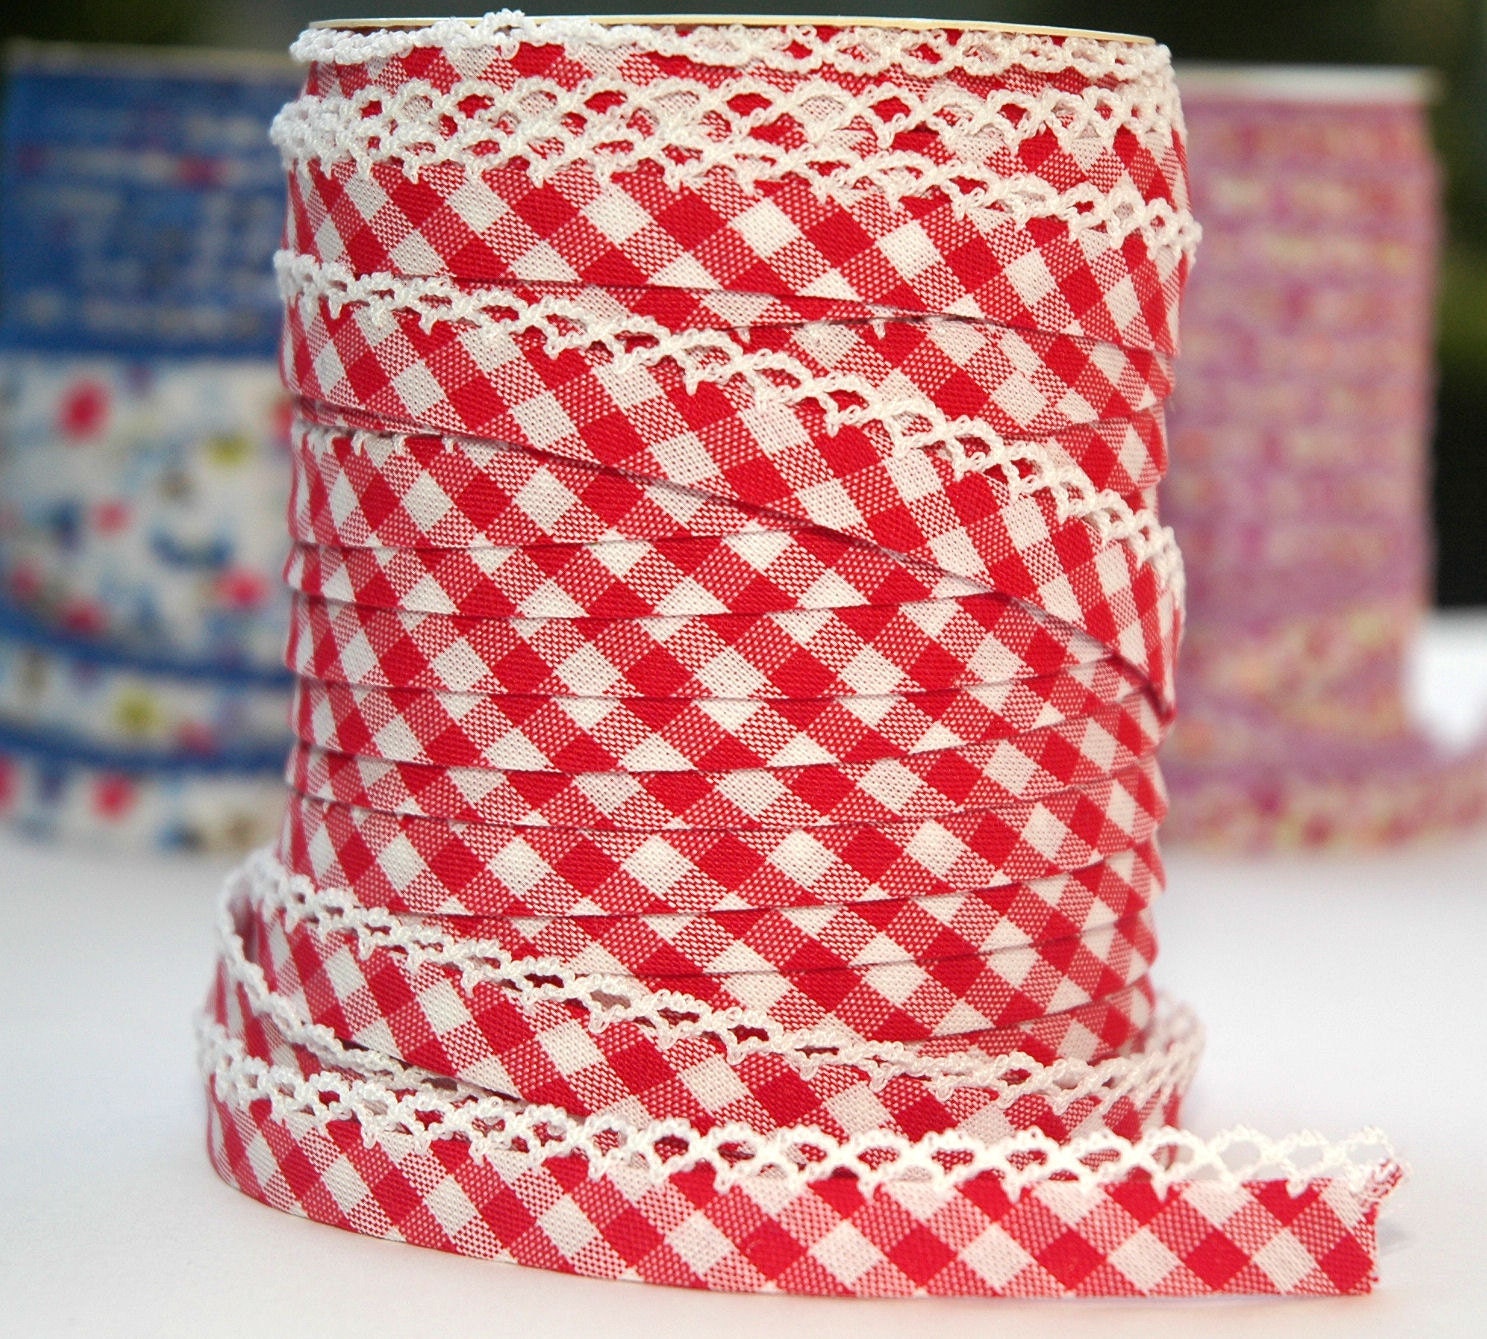 Bias Tape  Double Fold  Red Gingham Cotton and Lace Crochet - HollandFabricHouse